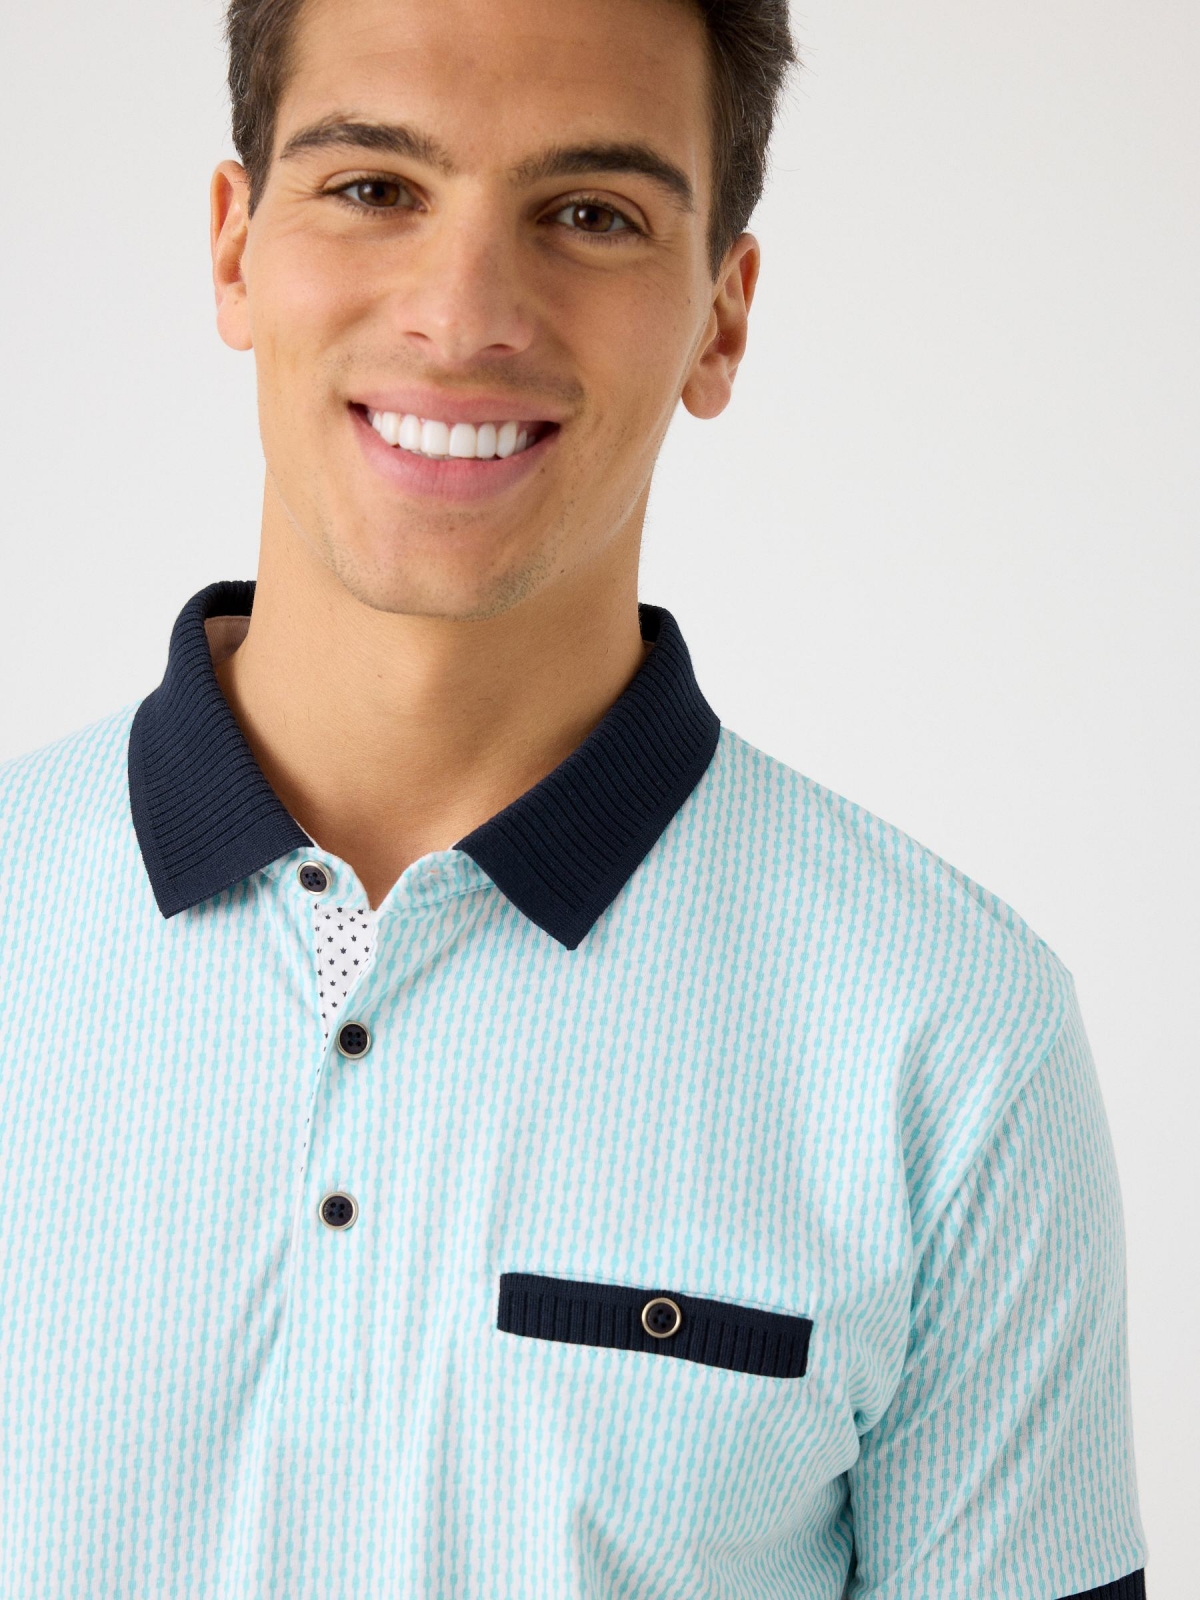 Printed polo with rib details | Men's Polo Shirts | INSIDE